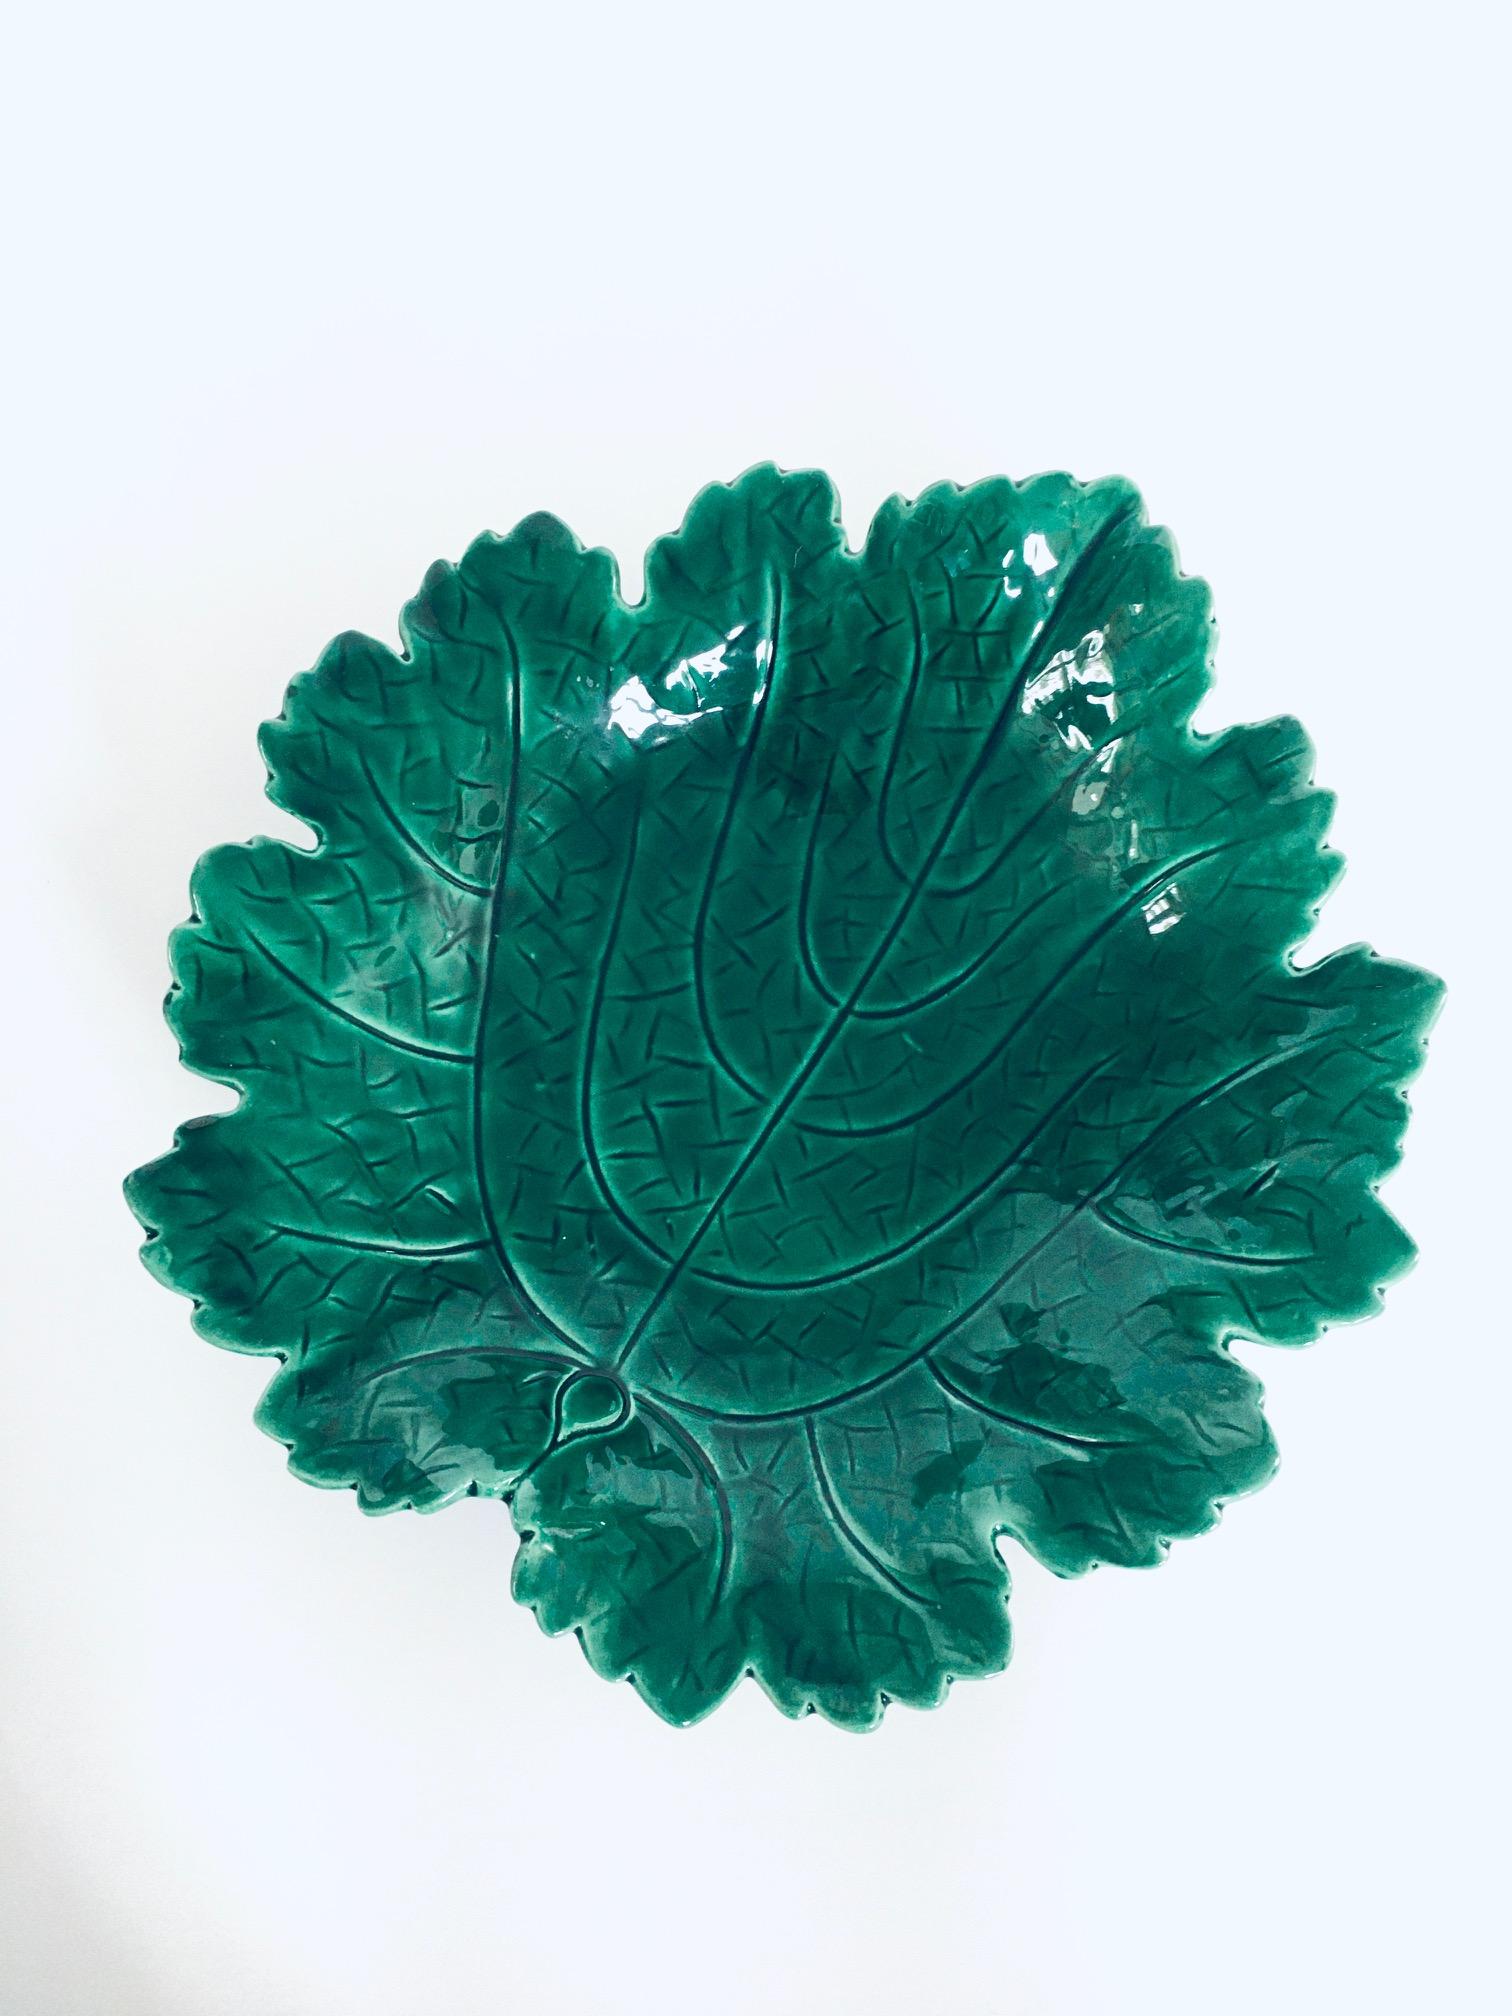 Vintage Studio Pottery Leaf Bowl by Albert Ferlay, Vallauris France 1960's In Good Condition For Sale In Oud-Turnhout, VAN